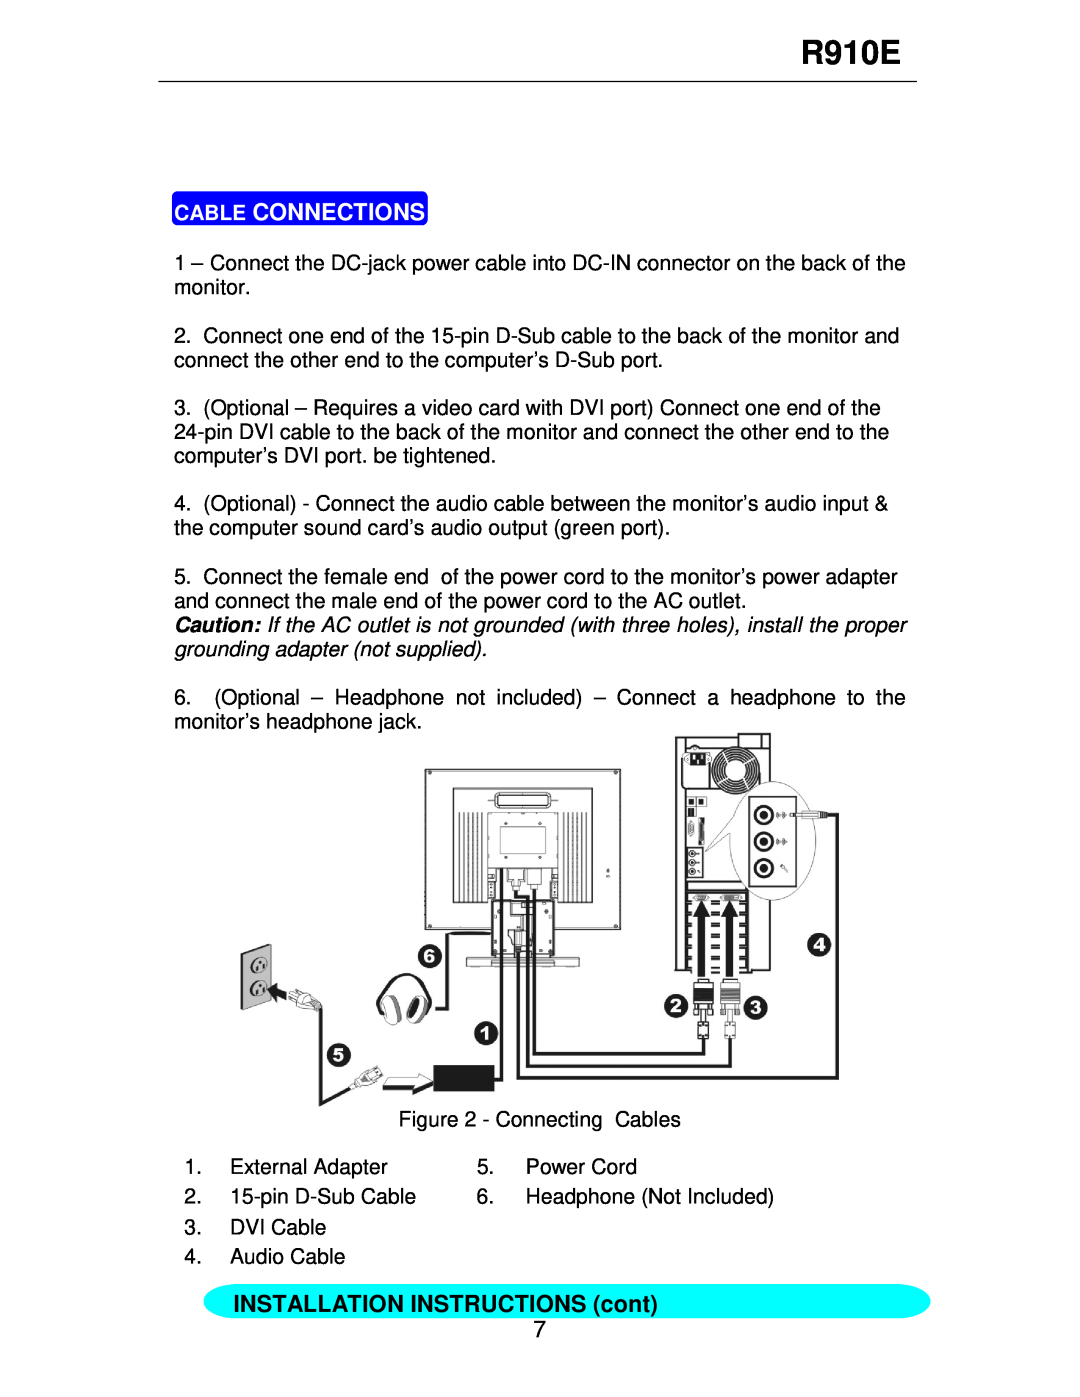 Rosewill R910E user manual Cable Connections, INSTALLATION INSTRUCTIONS cont 